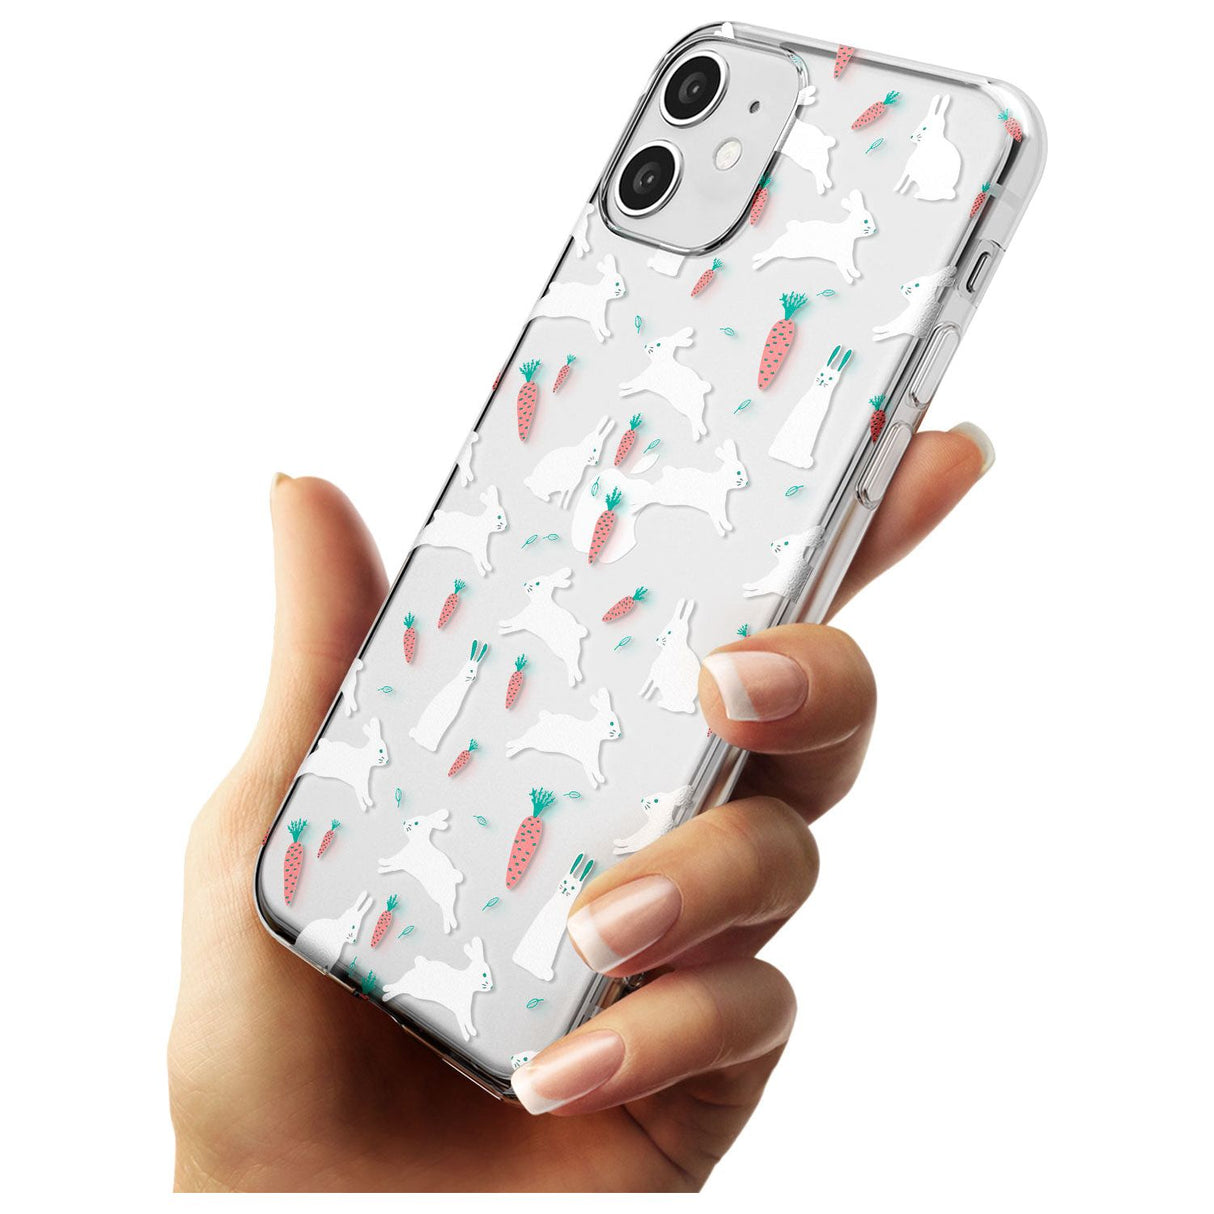 White Bunnies and Carrots Slim TPU Phone Case for iPhone 11